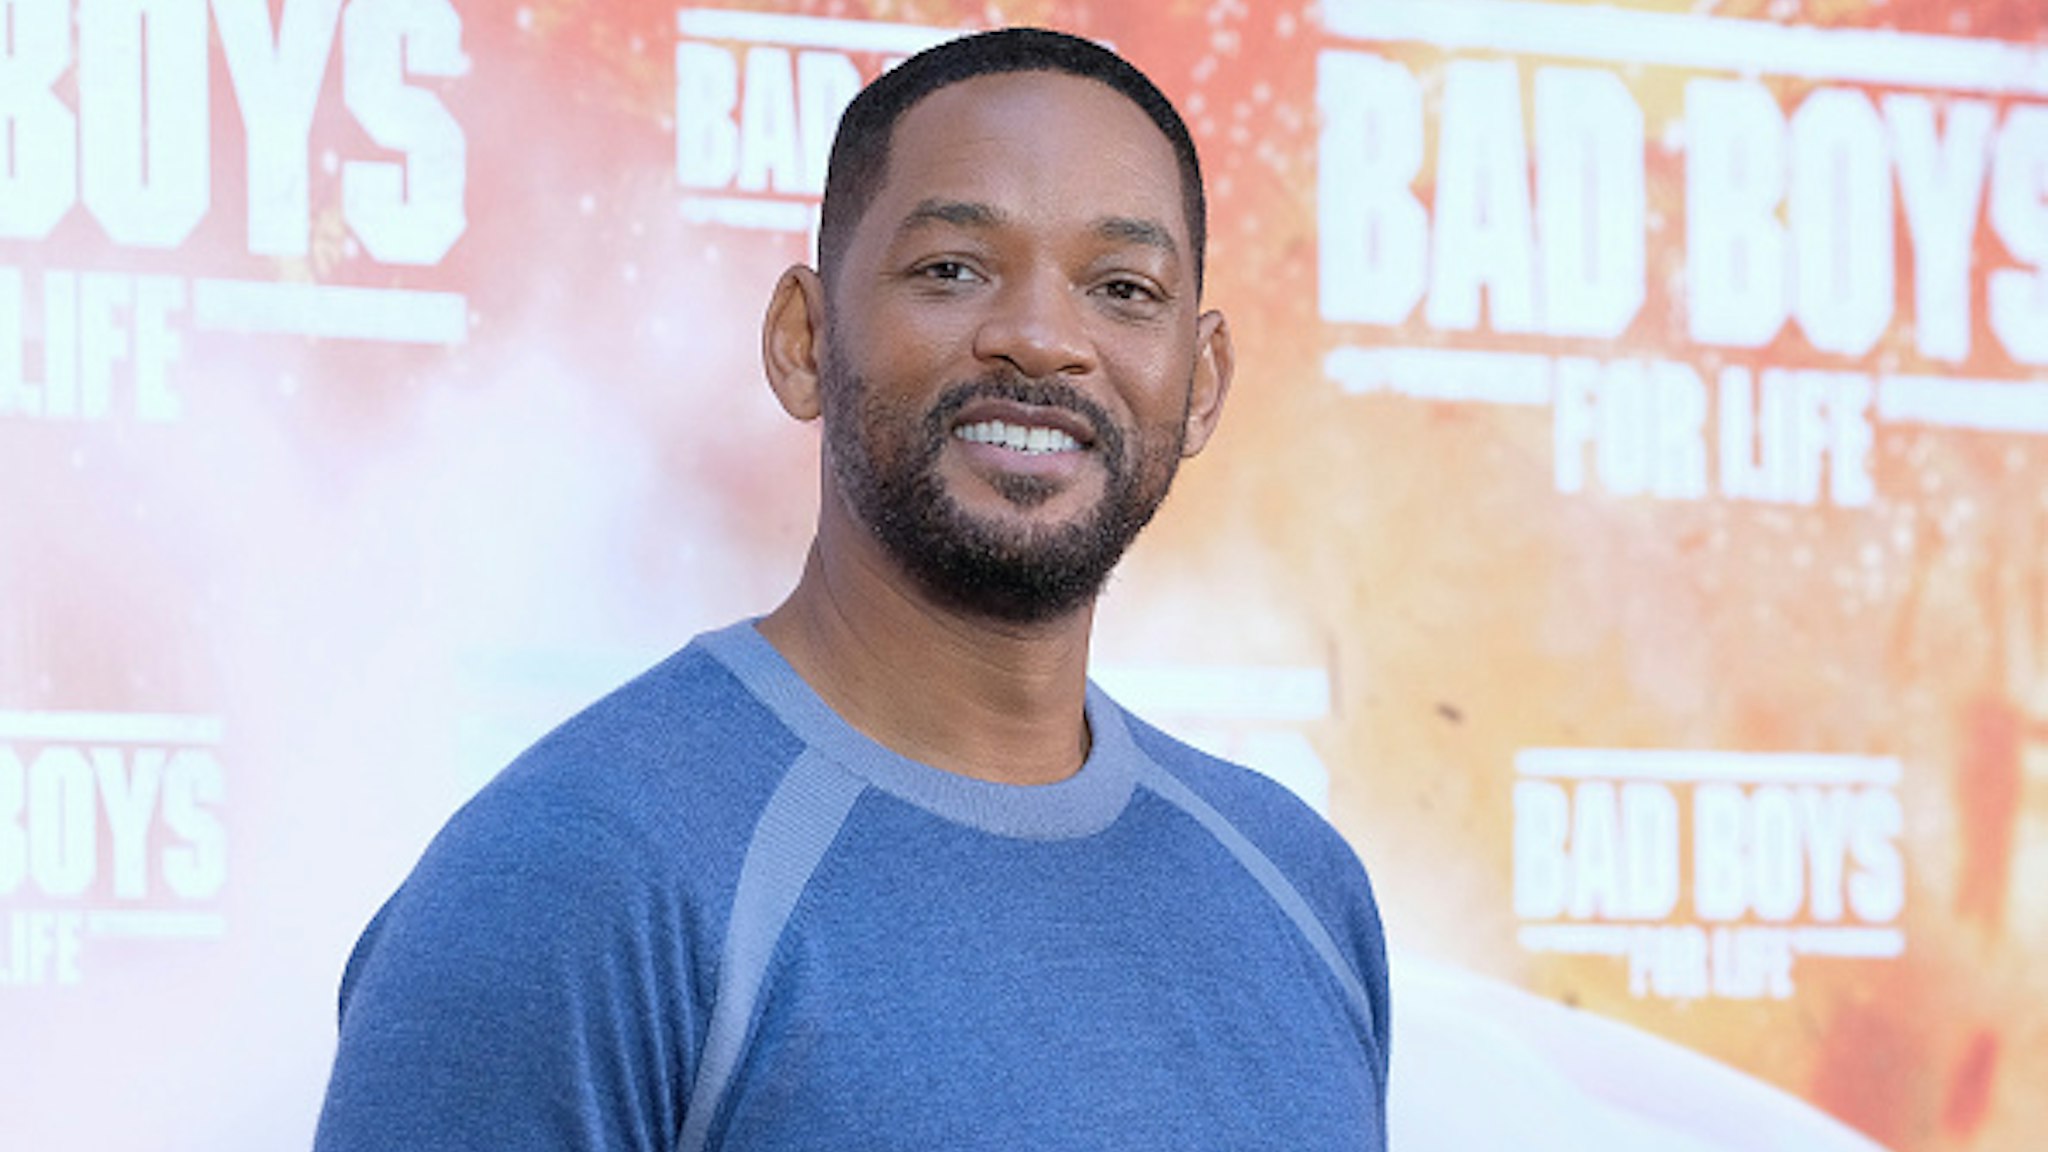 Us actors Martin Will Smith attends 'Bad Boys For Life' photocall at Villa Magna hotel on January 08, 2020 in Madrid, Spain